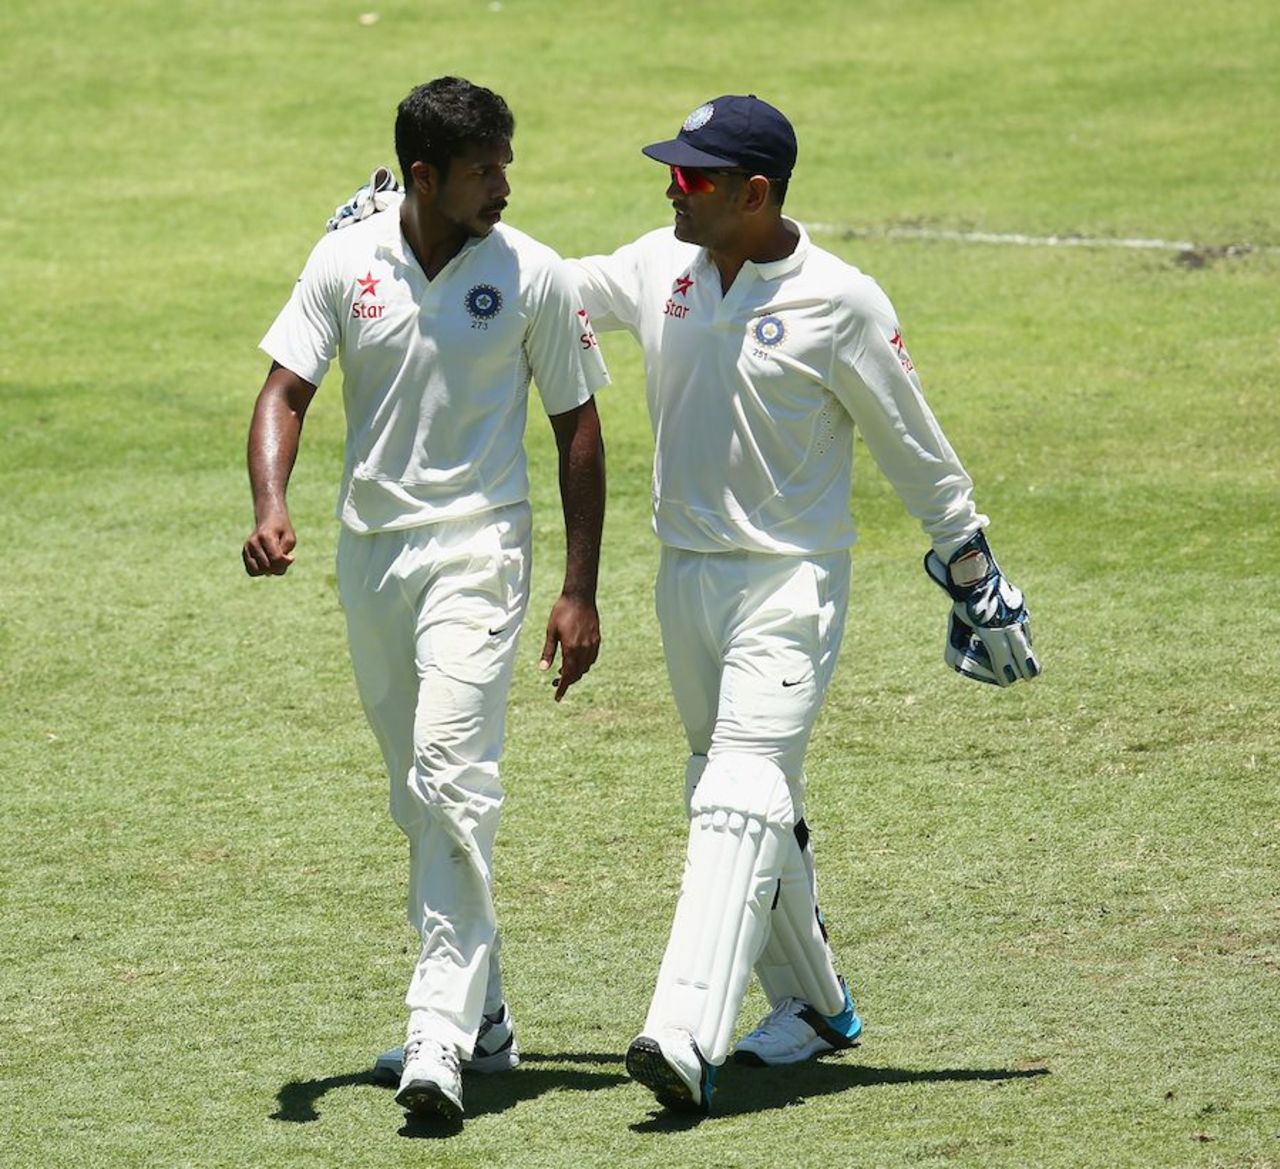 MS Dhoni talks to Varun Aaron as India went to pieces, Australia v India, 2nd Test, Brisbane, 3rd day, December 19, 2014